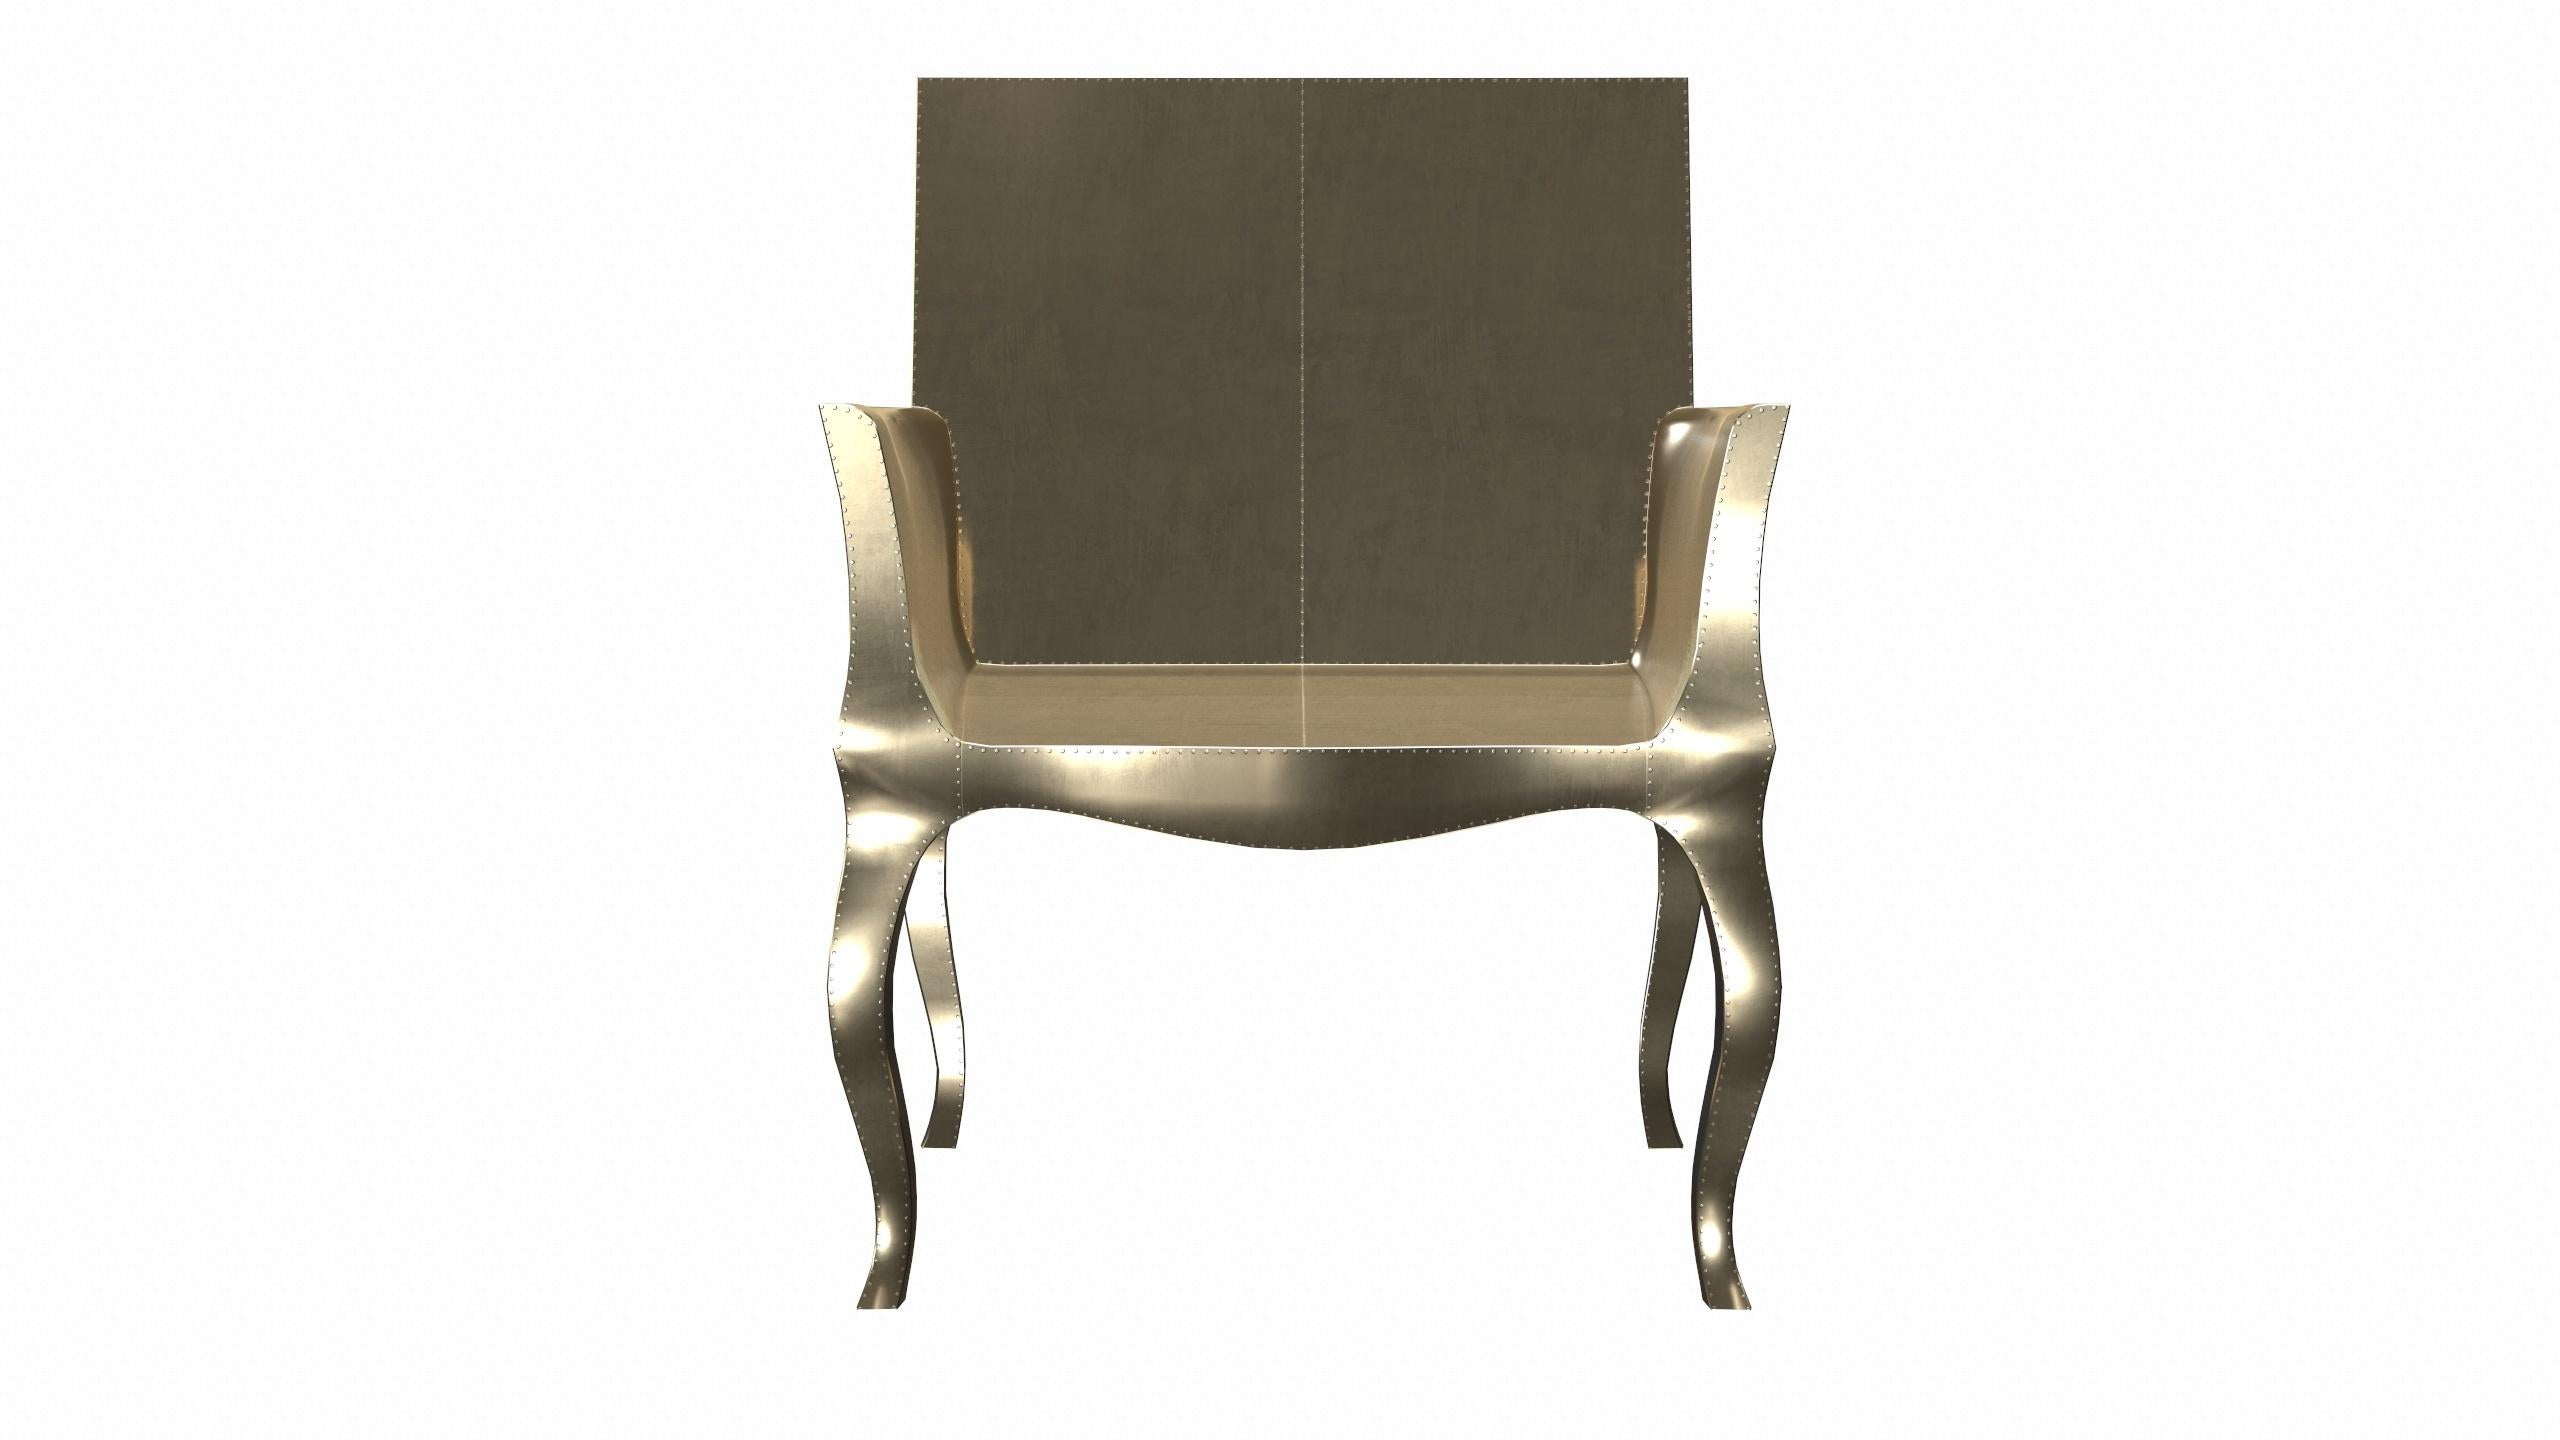 Indian Art Deco Style Chairs in Smooth Brass by Paul Mathieu for S. Odegard For Sale